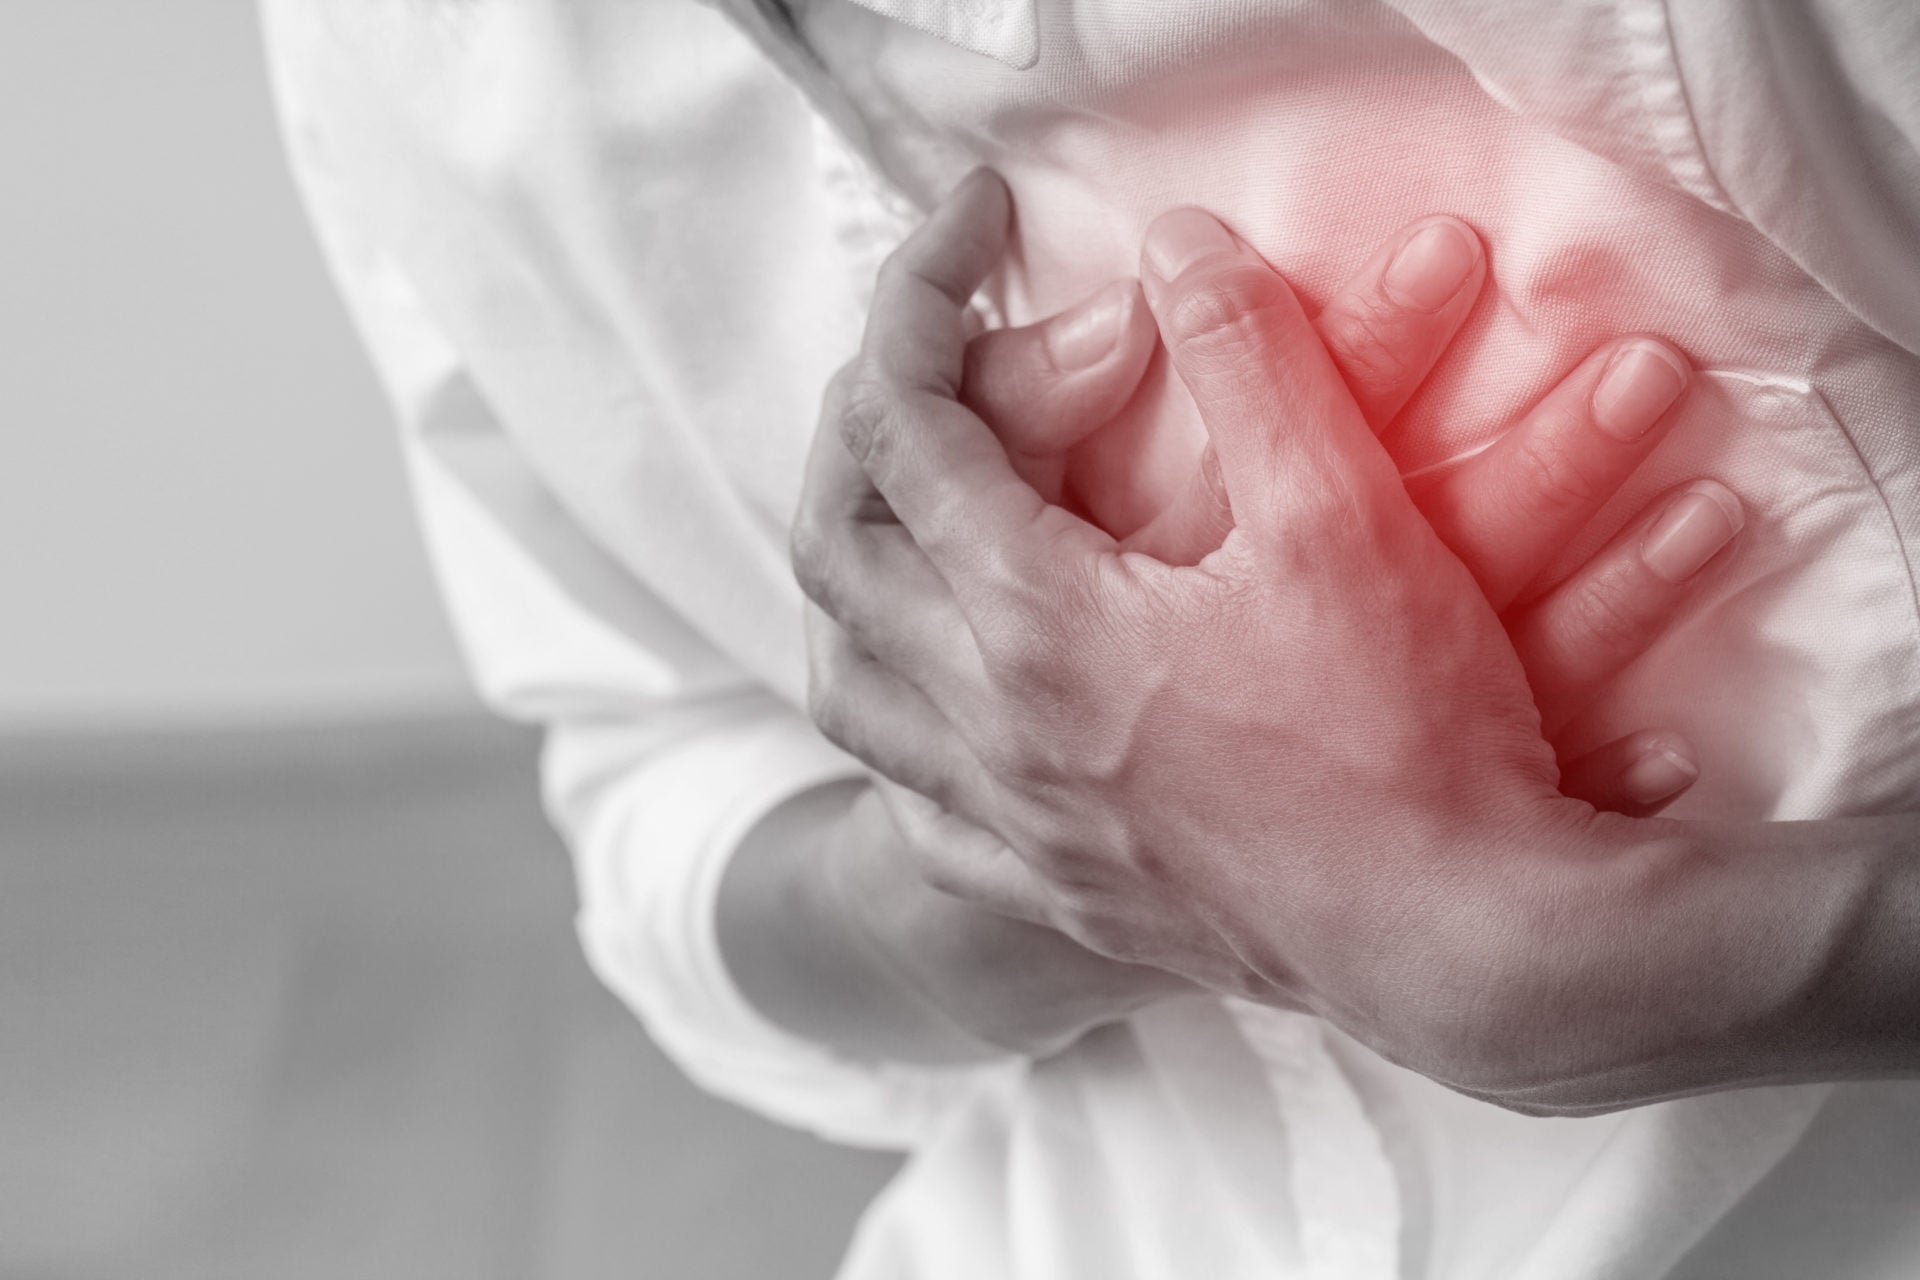 Machine learning predicts heart attacks with 90% accuracy